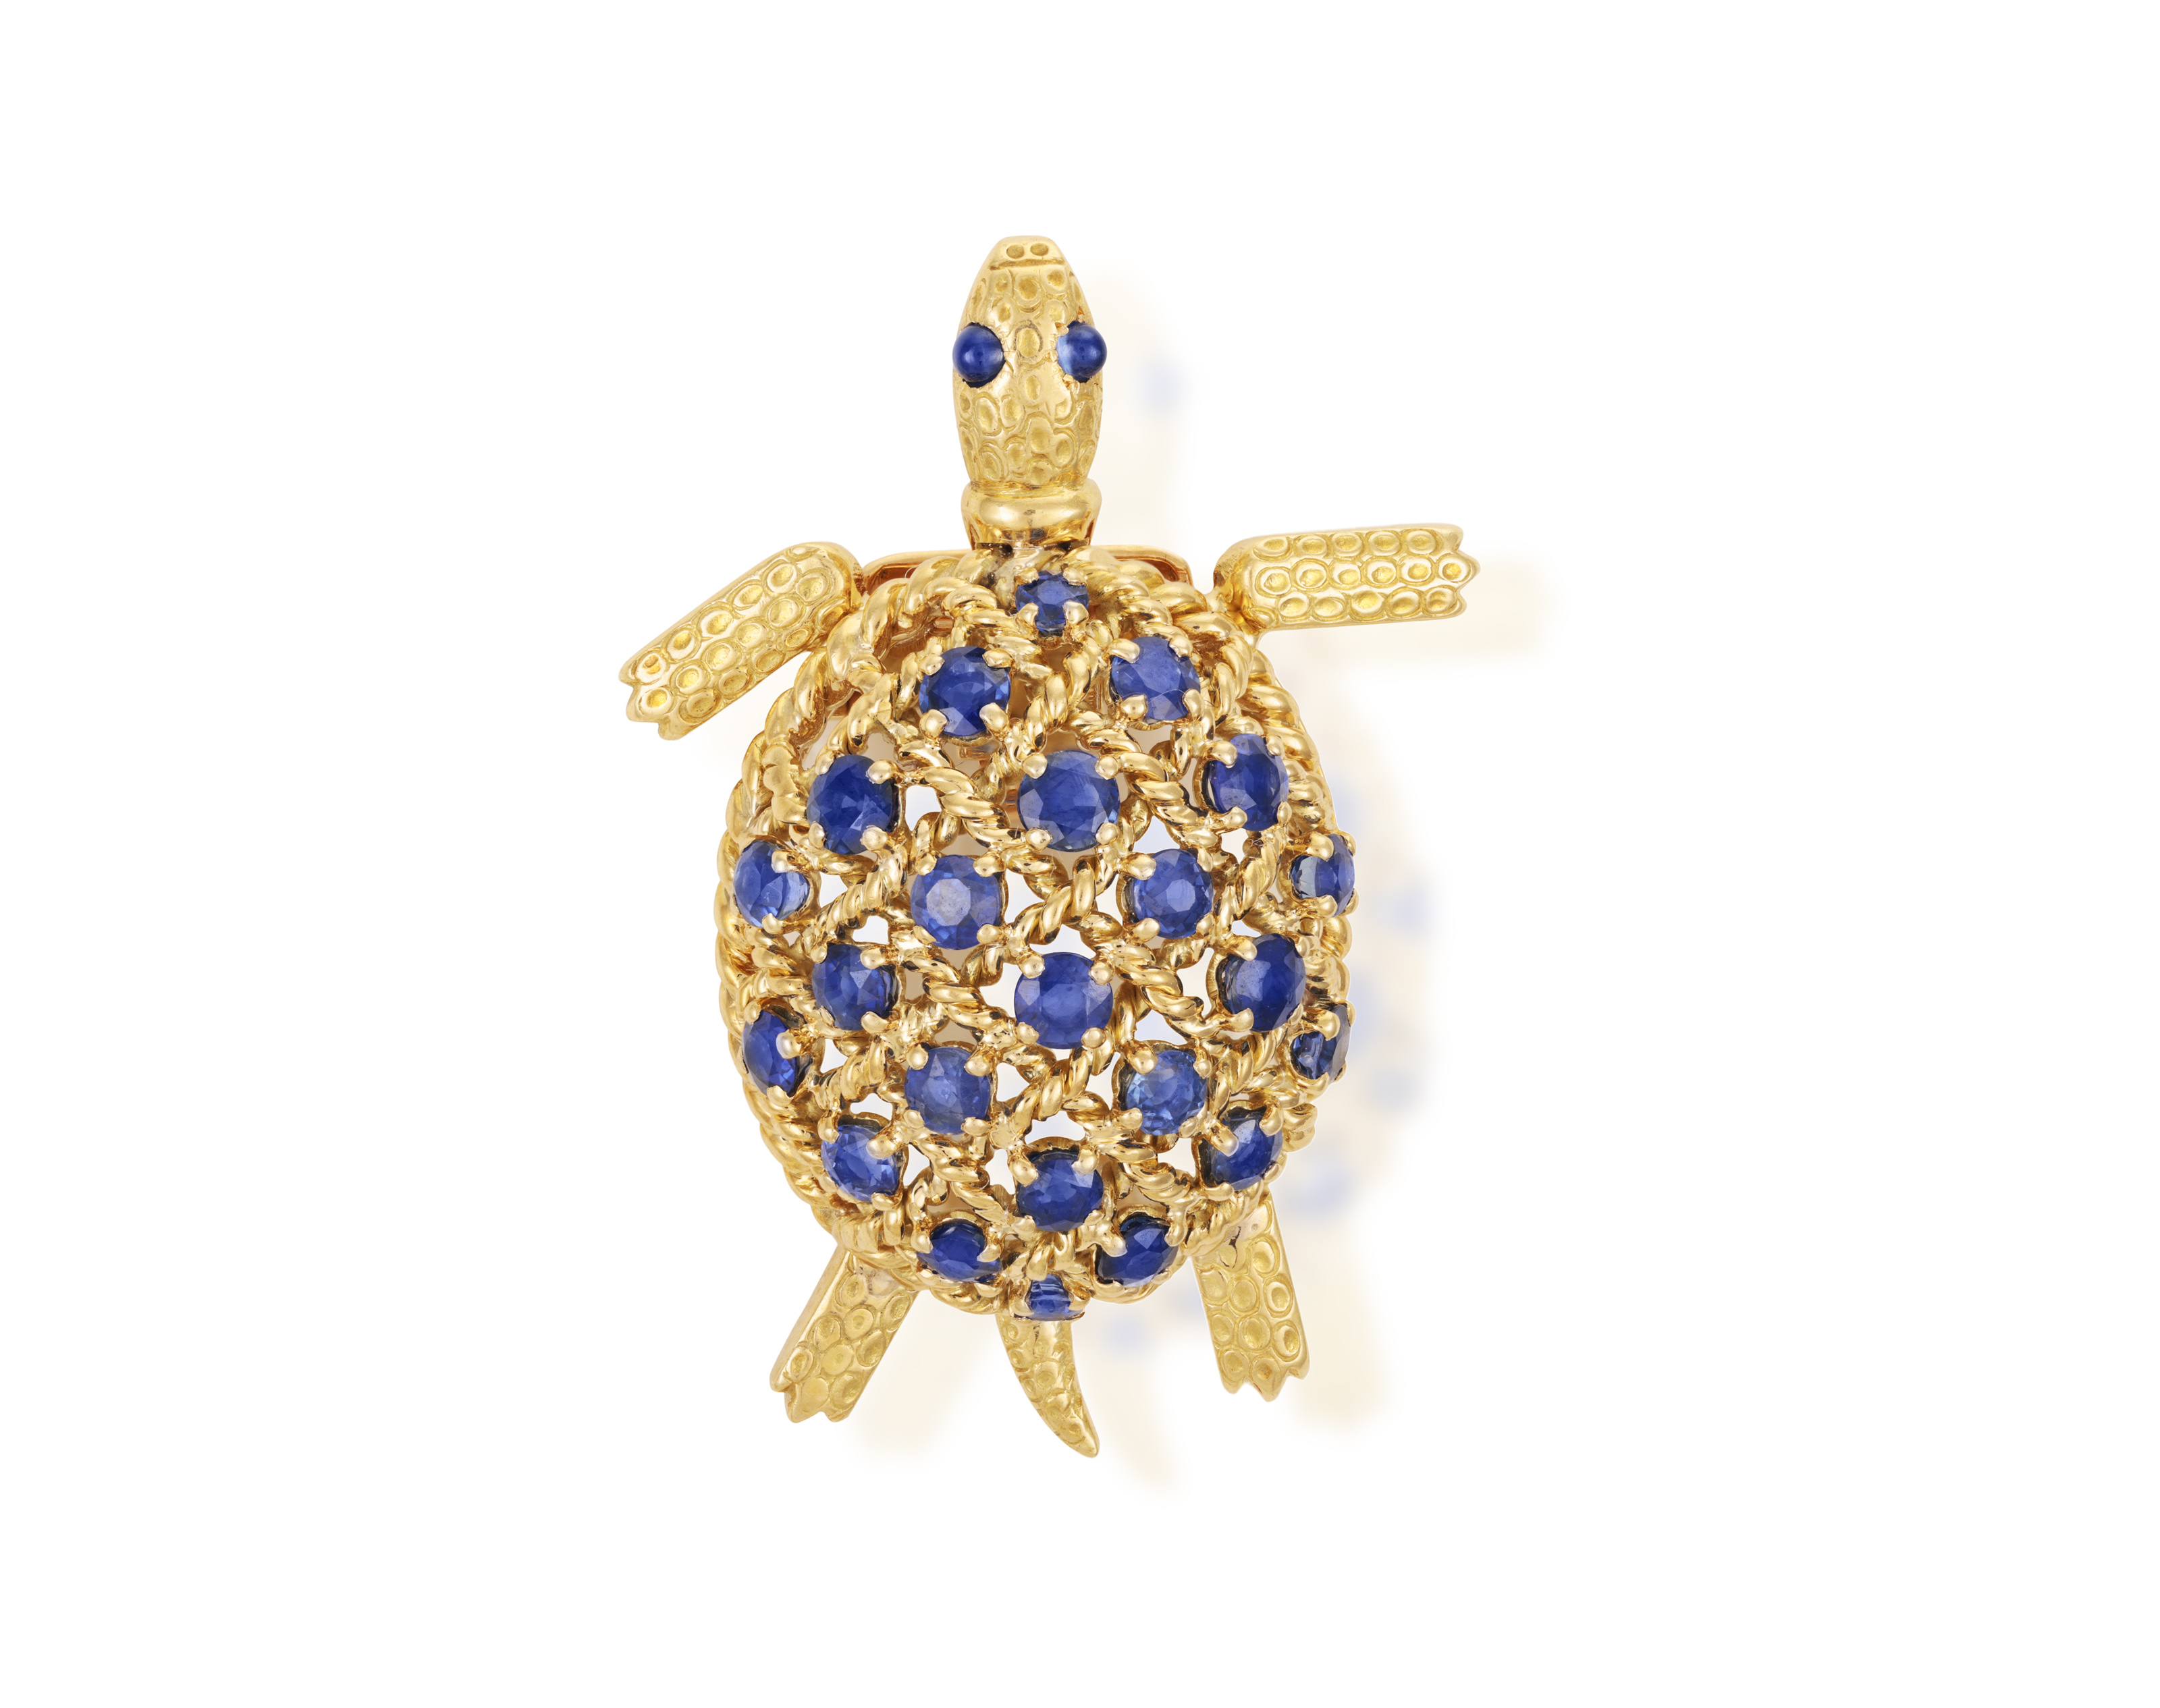 A SAPPHIRE NOVELTY BROOCH, BY CARTIER, CIRCA 1960 Designed as a turtle, the shell set with